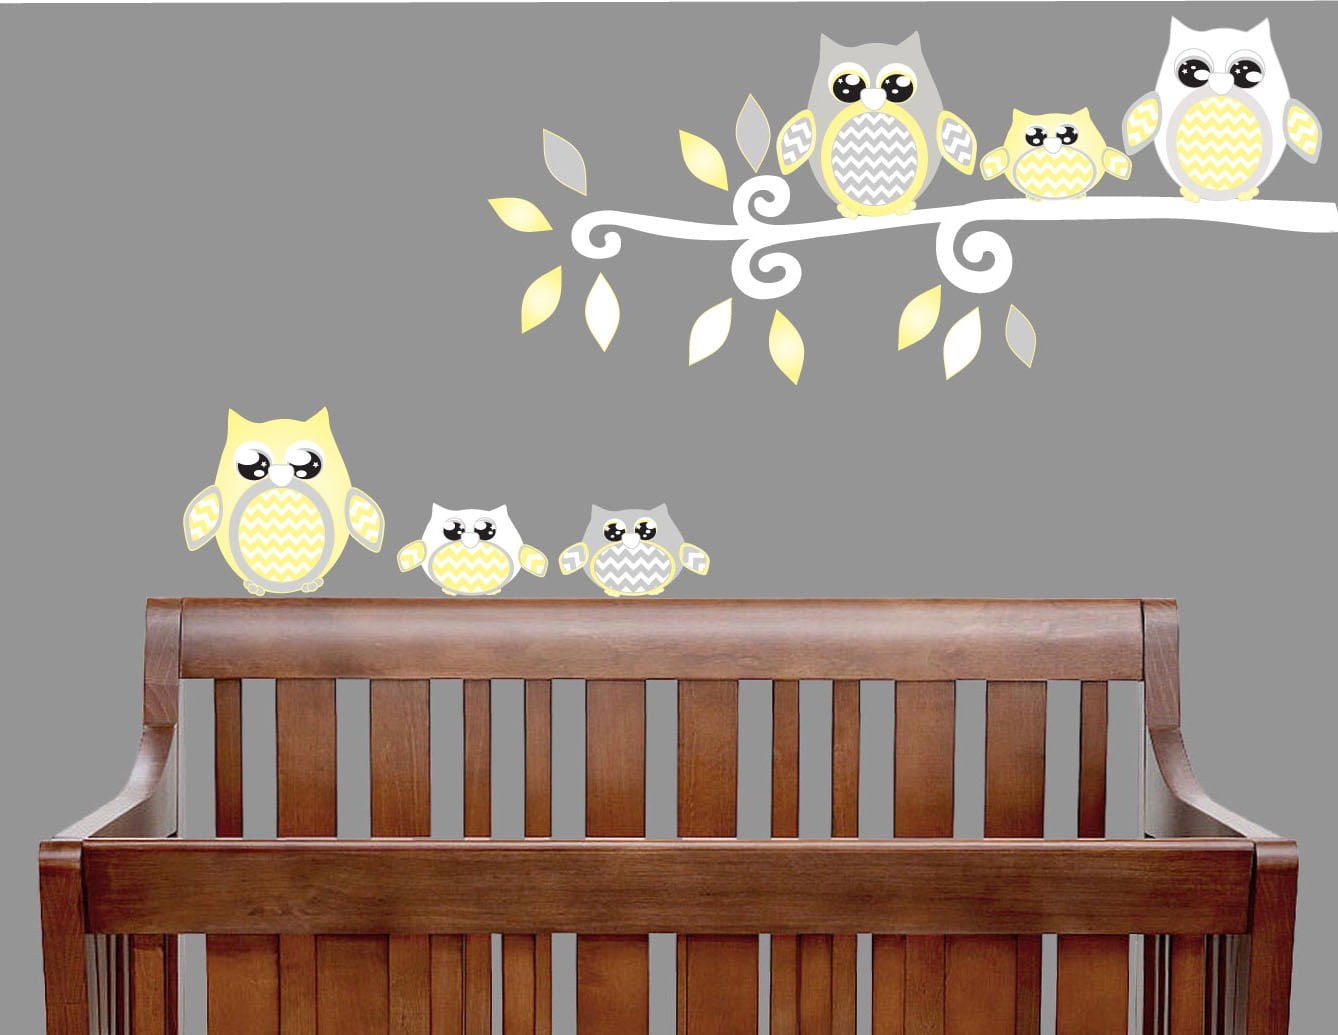 Details about   Taggies removable Owl Wall Sticker Vinyl Decor Decals 